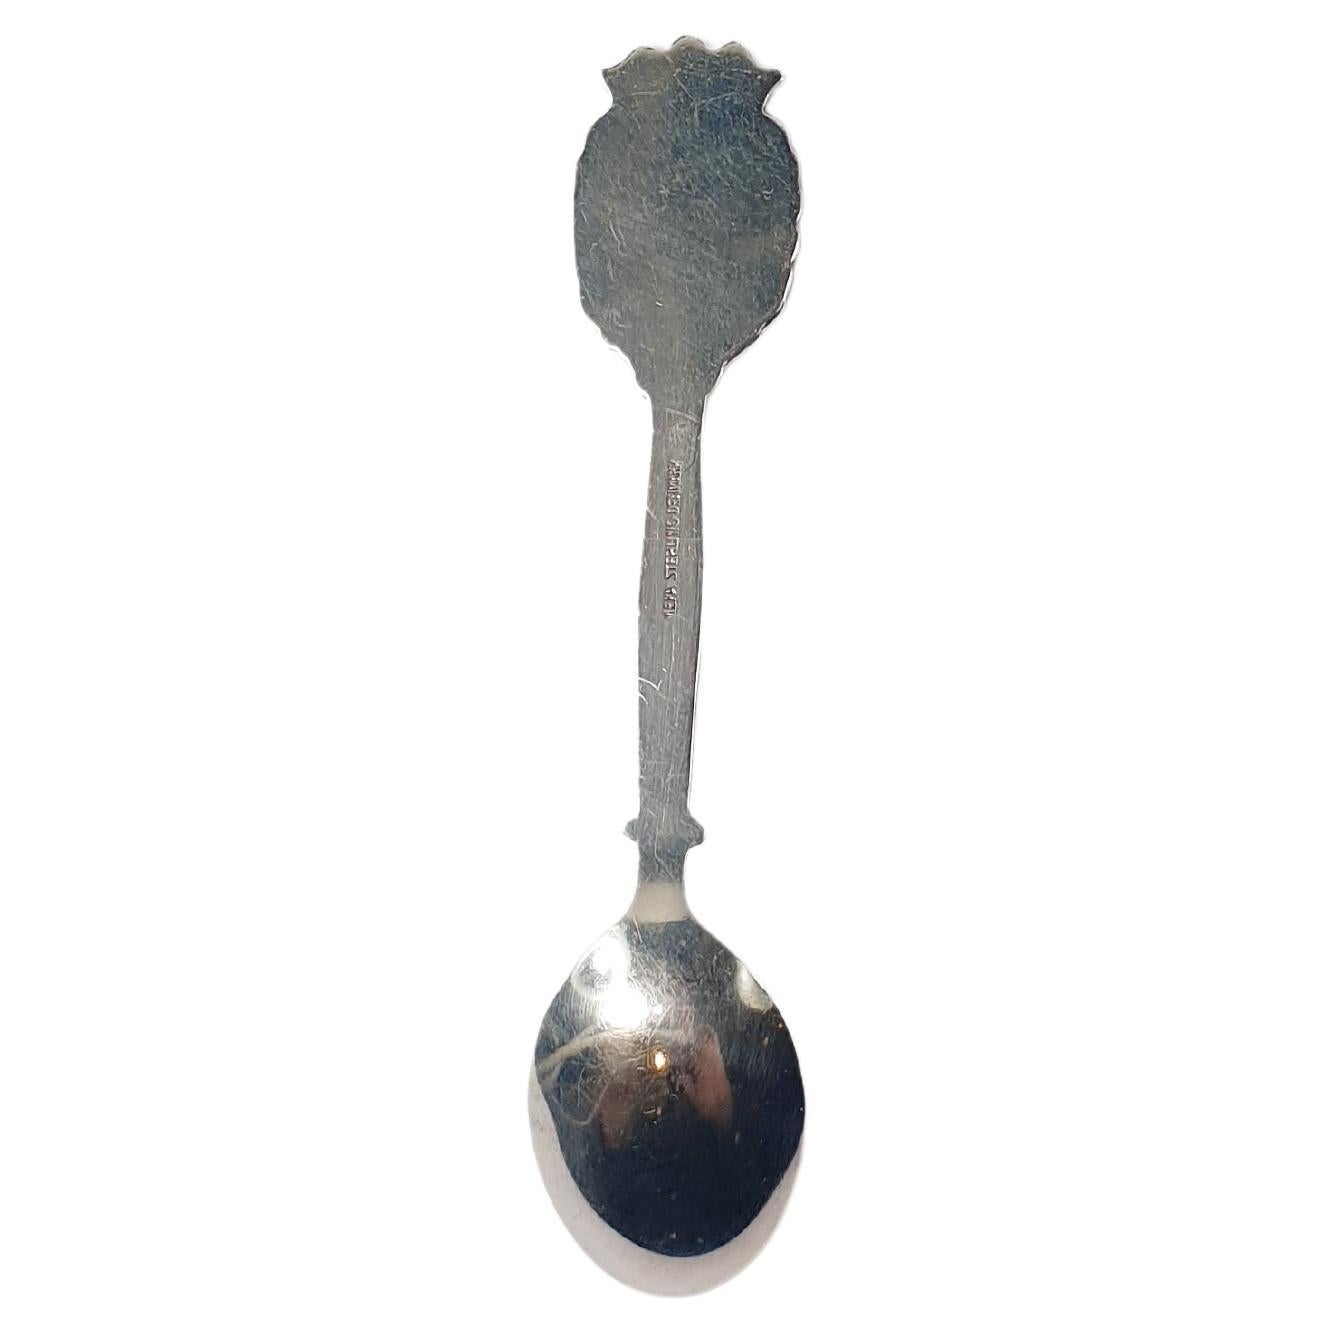 Antigua Collection Silver Teaspoon
Length 3.70in / 9.4cm
Width 0.78in / 2cm
Weight 12gr

PRADERA is a  second generation of a family run business jewelers of reference in Spain, with a large track record  being official distributers of prime